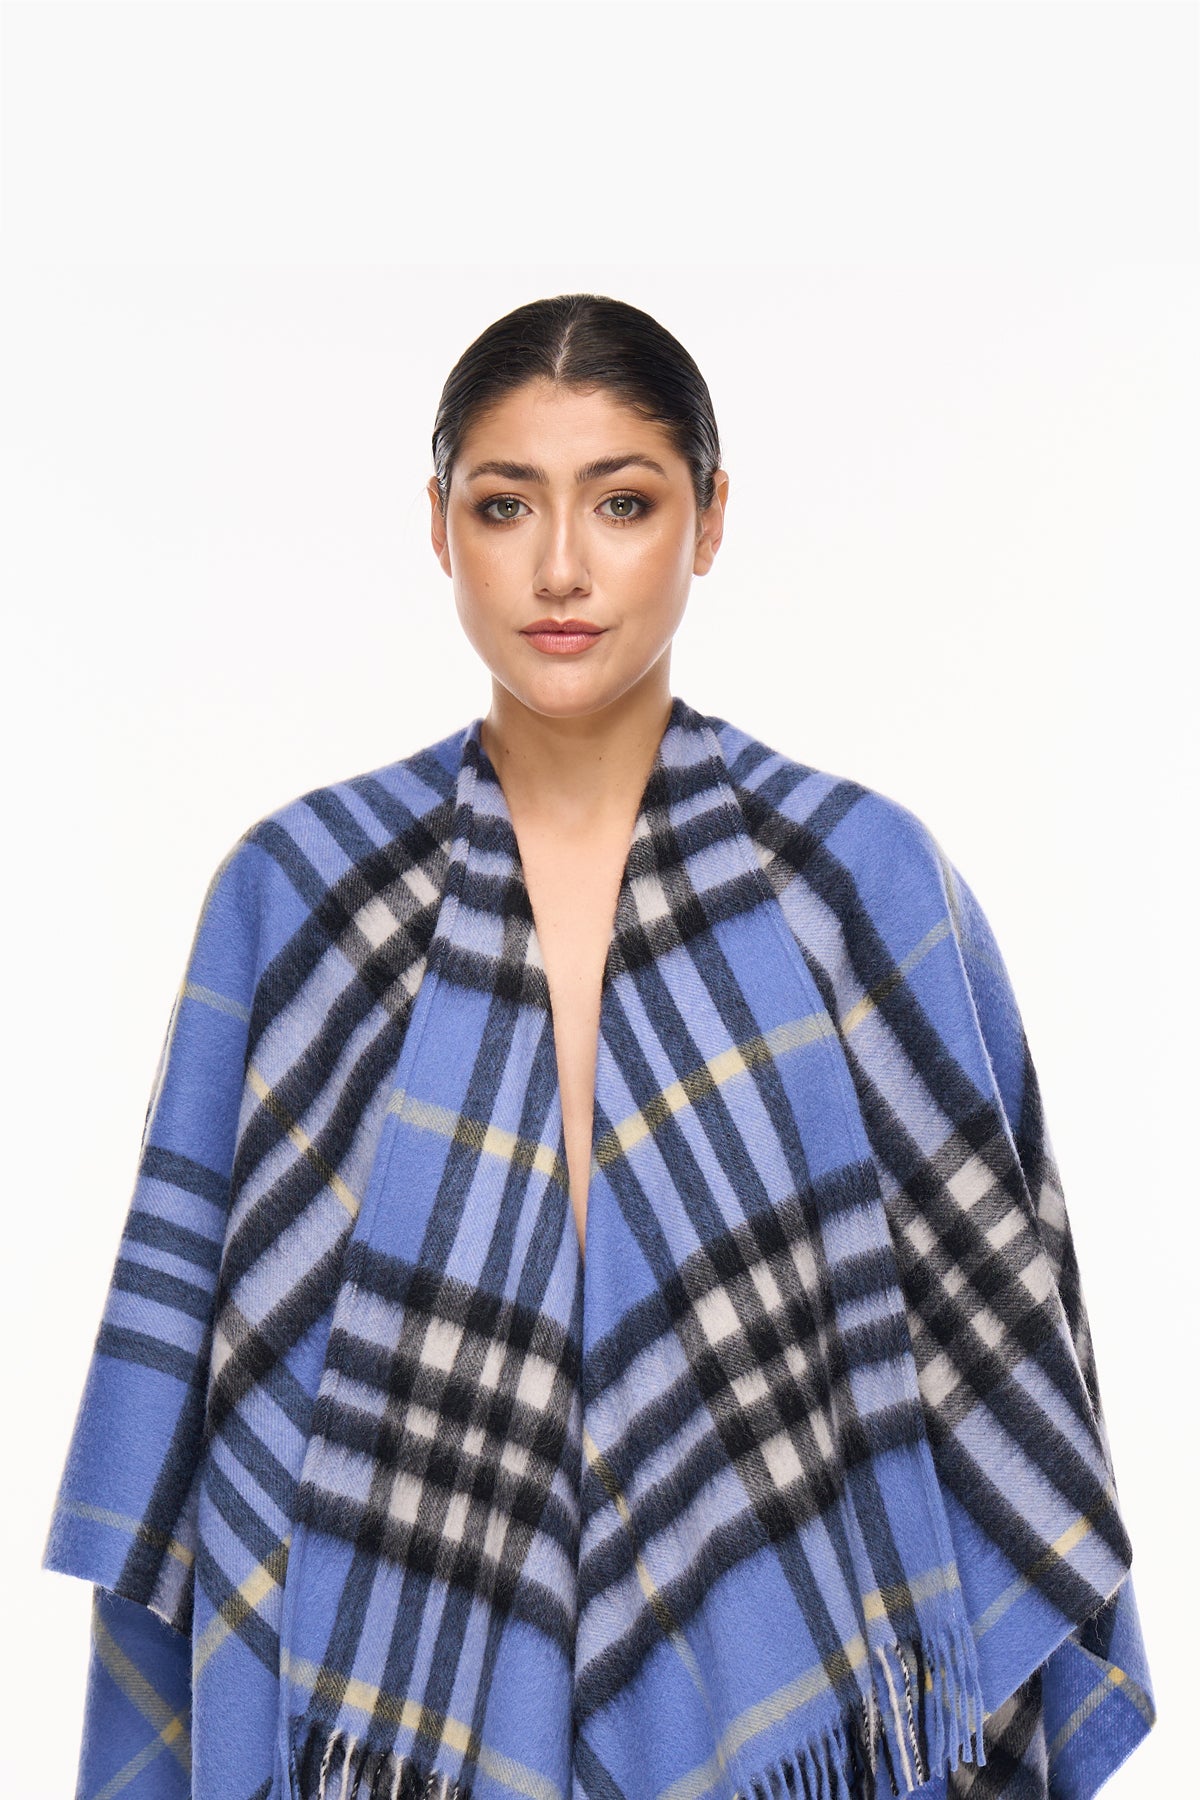 Cape DC Classic Blue Poncho 100% Pure Lambswool